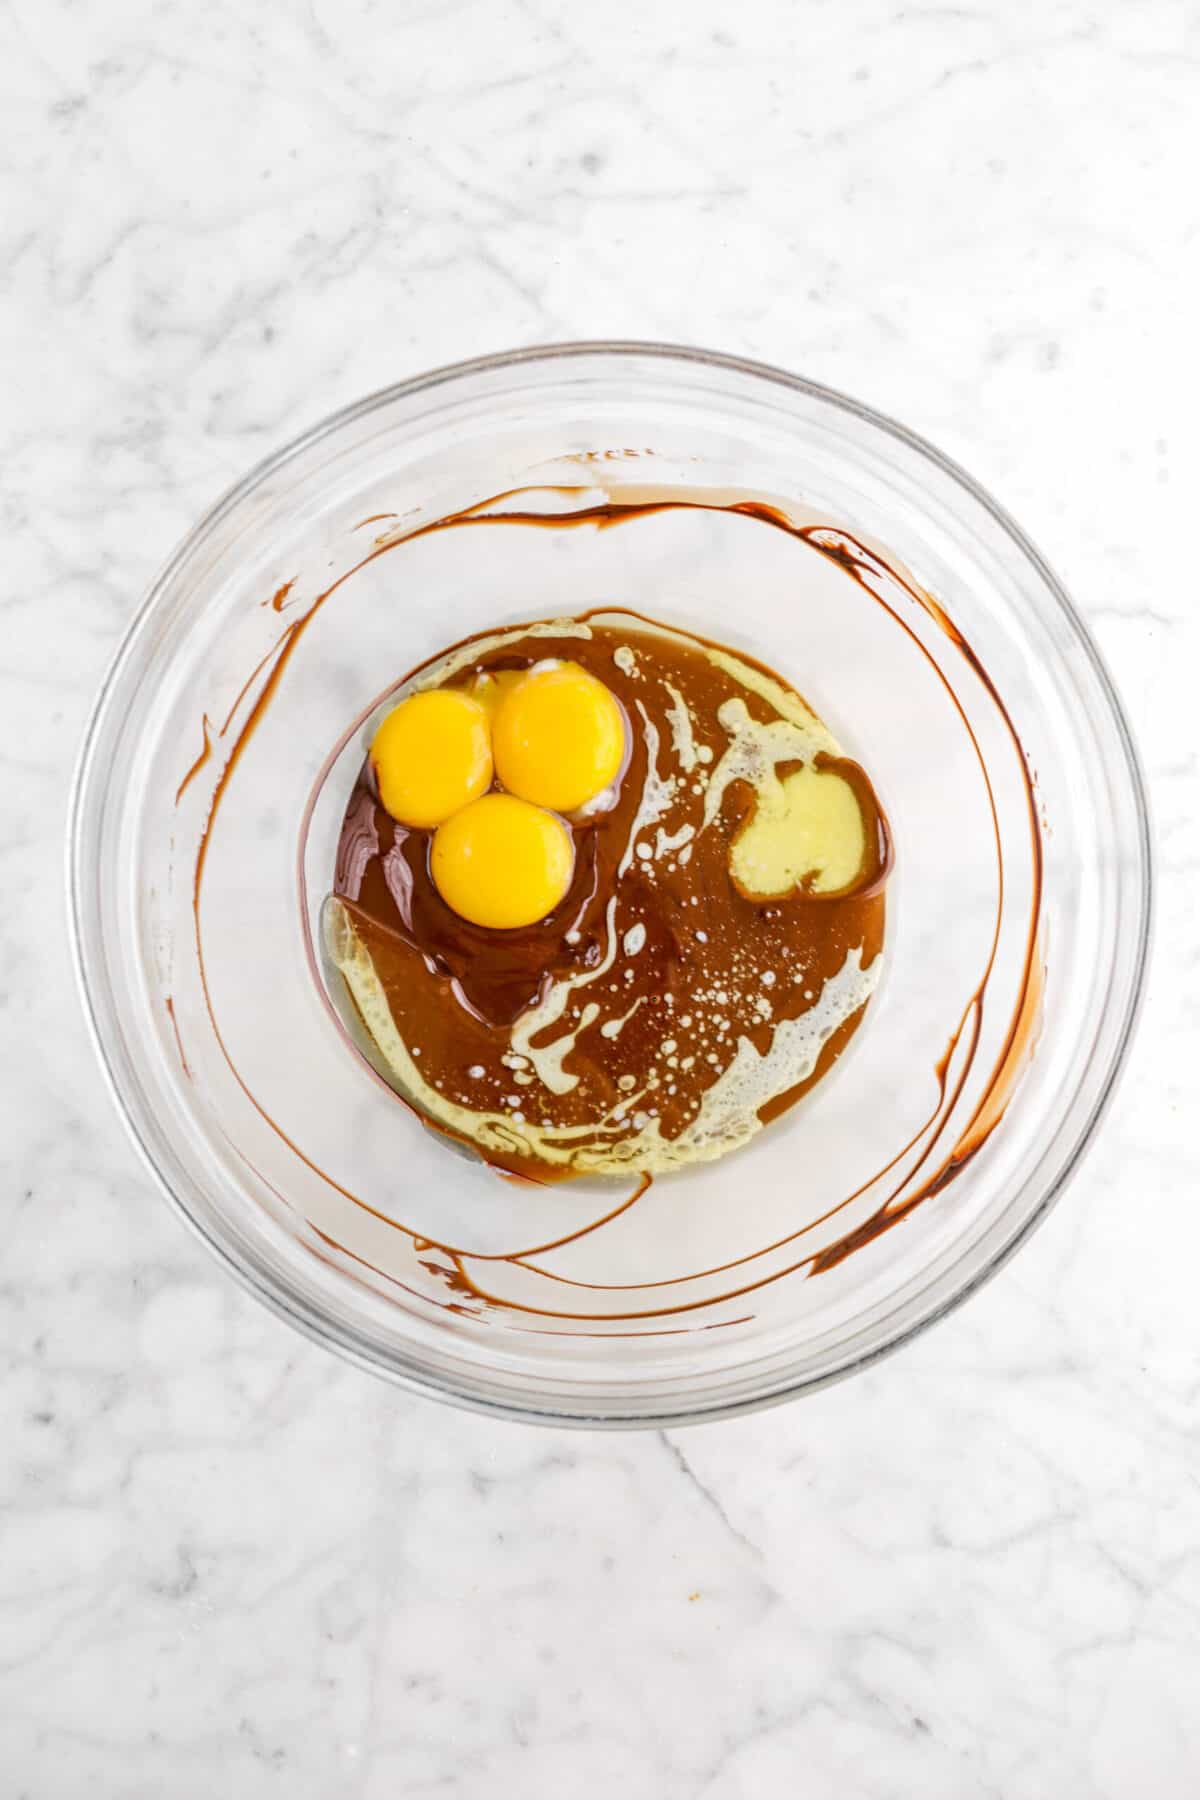 egg yolks and melted butter added to melted chocolate